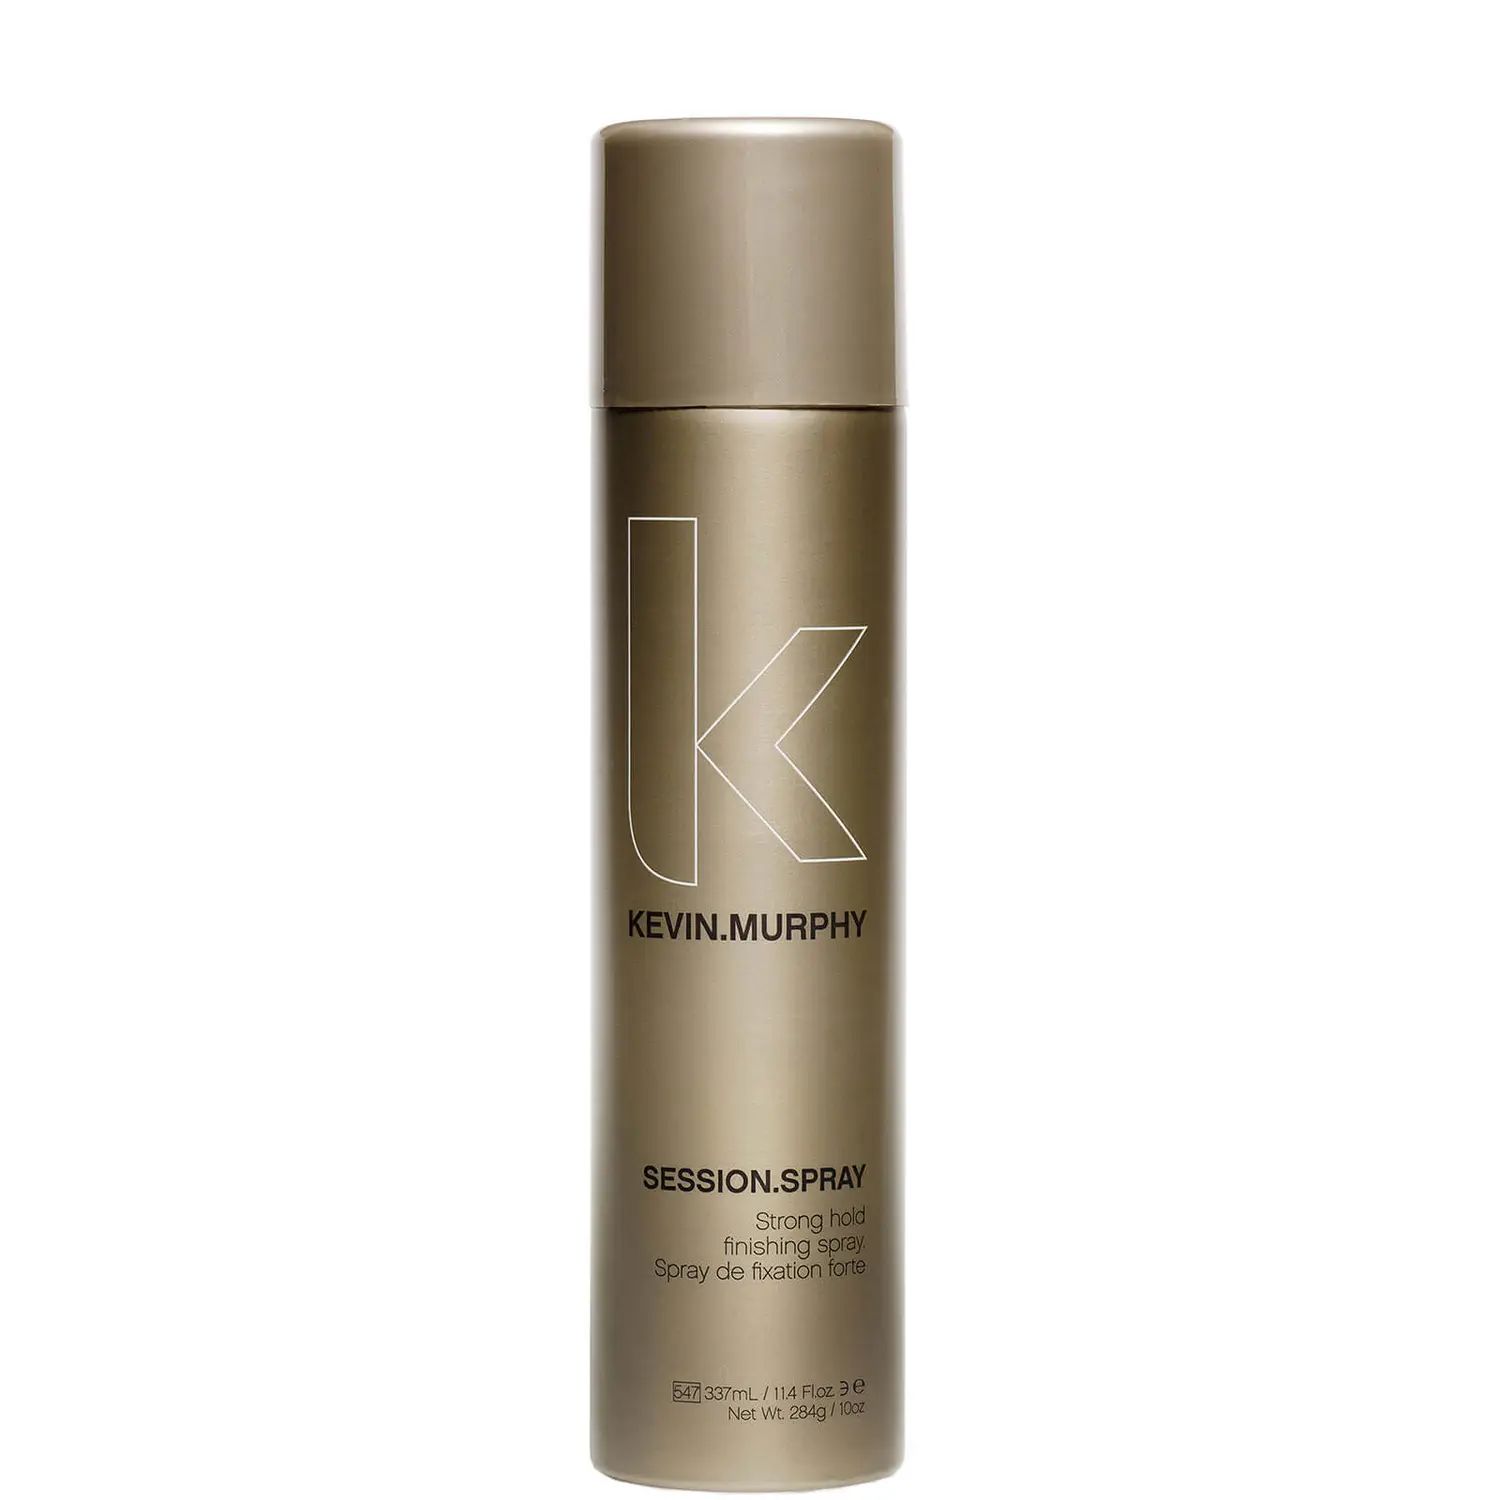 KEVIN.MURPHY Session.Spray | Cult Beauty